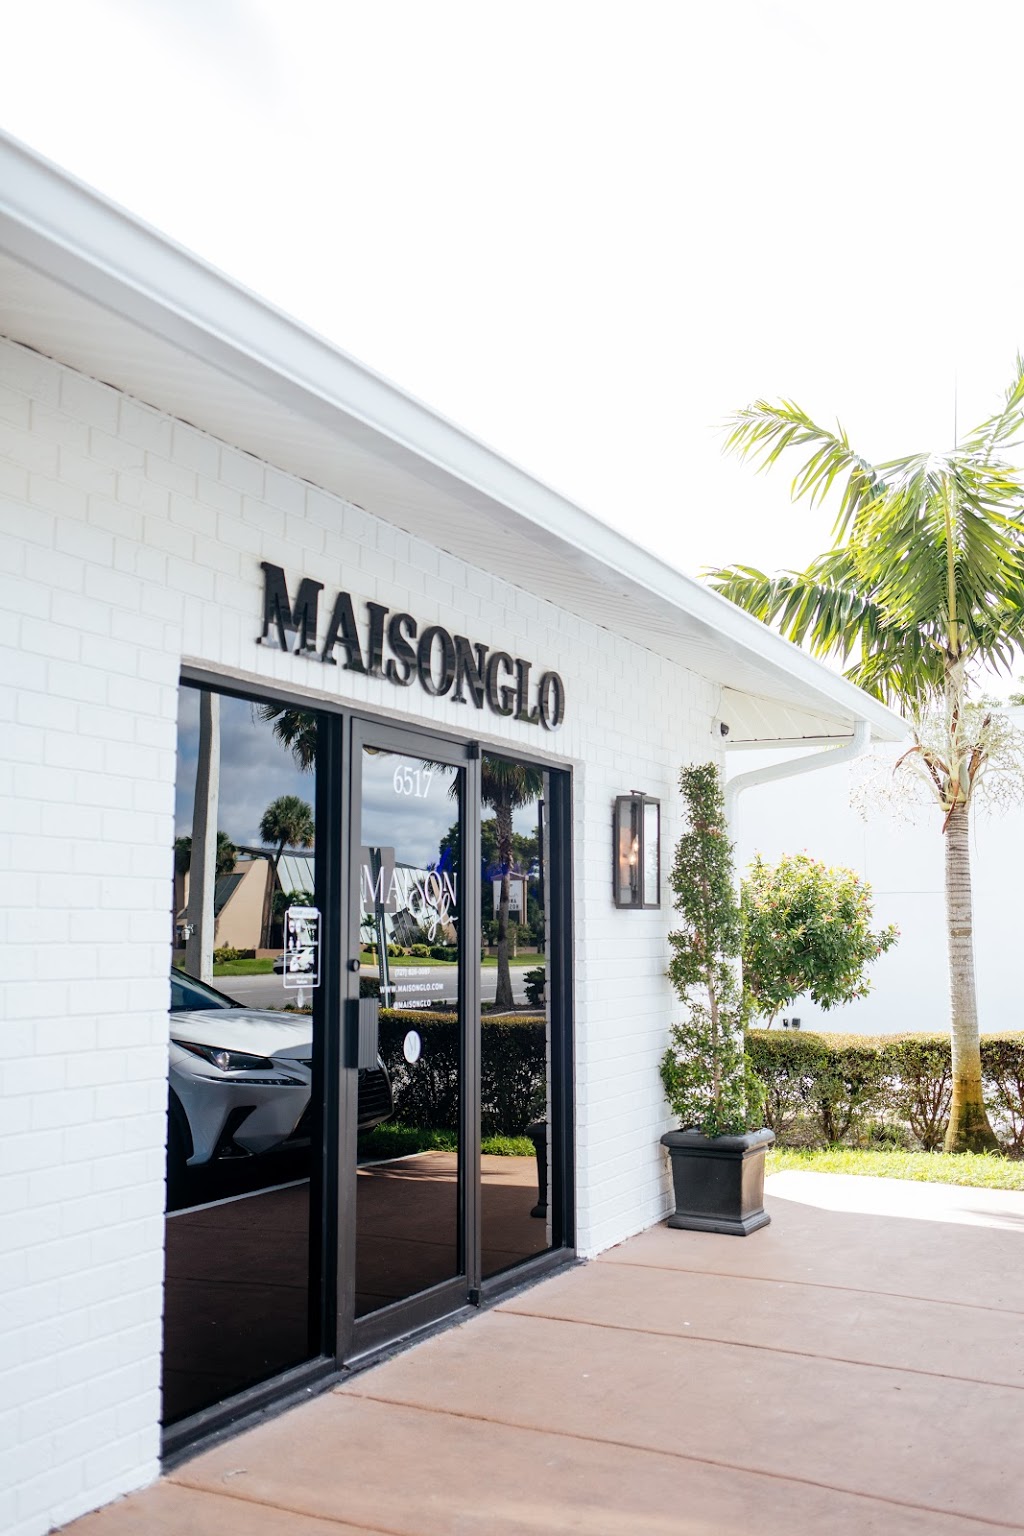 Maisonglo | 6517 4th St N, St. Petersburg, FL 33702 | Phone: (727) 826-0087